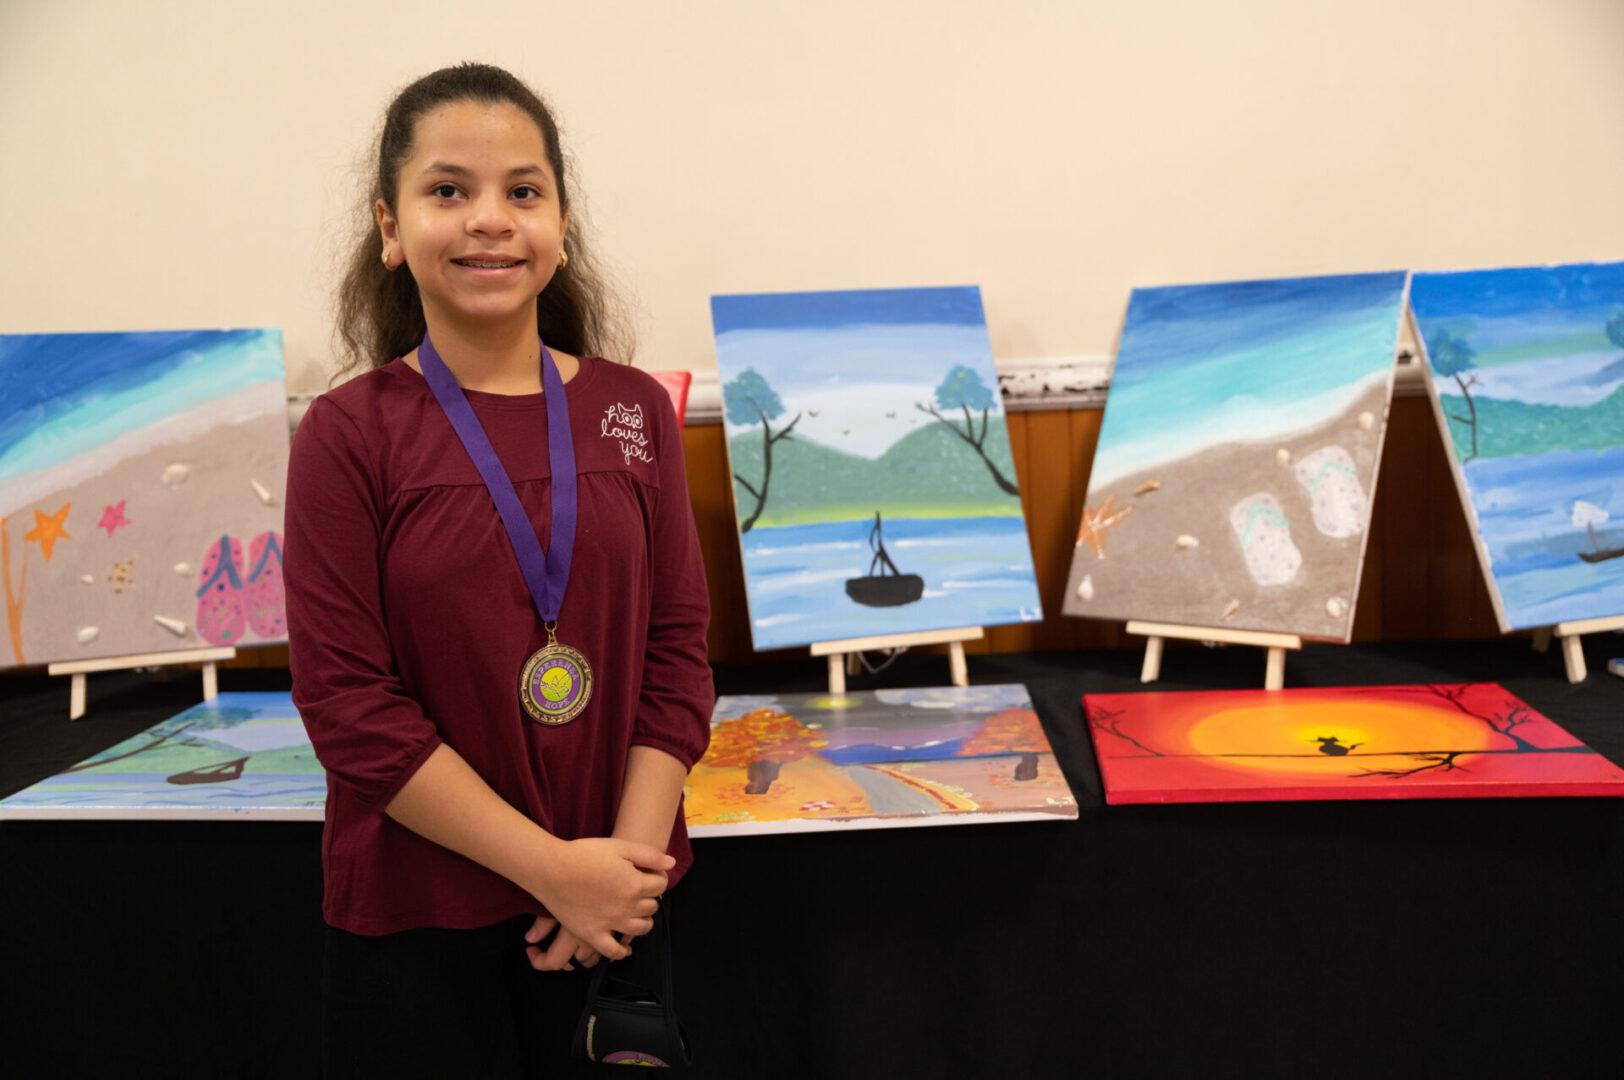 A girl with a medal standing at the table with the paintings